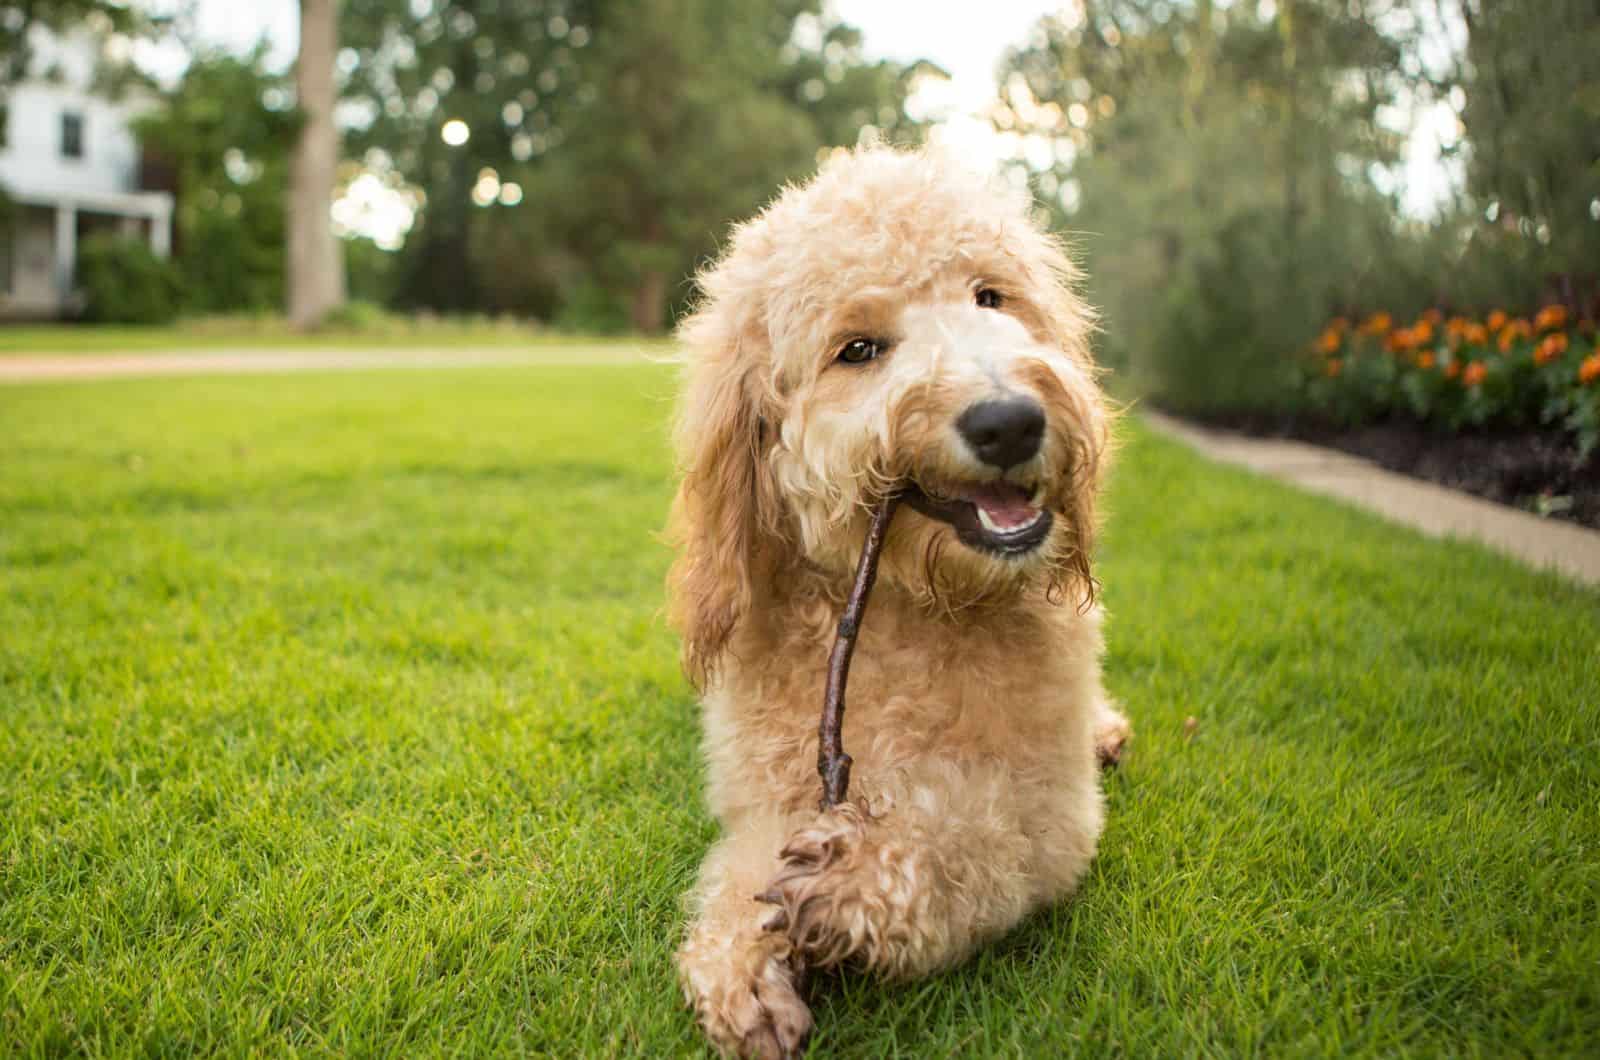 goldendoodle biting his toy outdoor on the grass